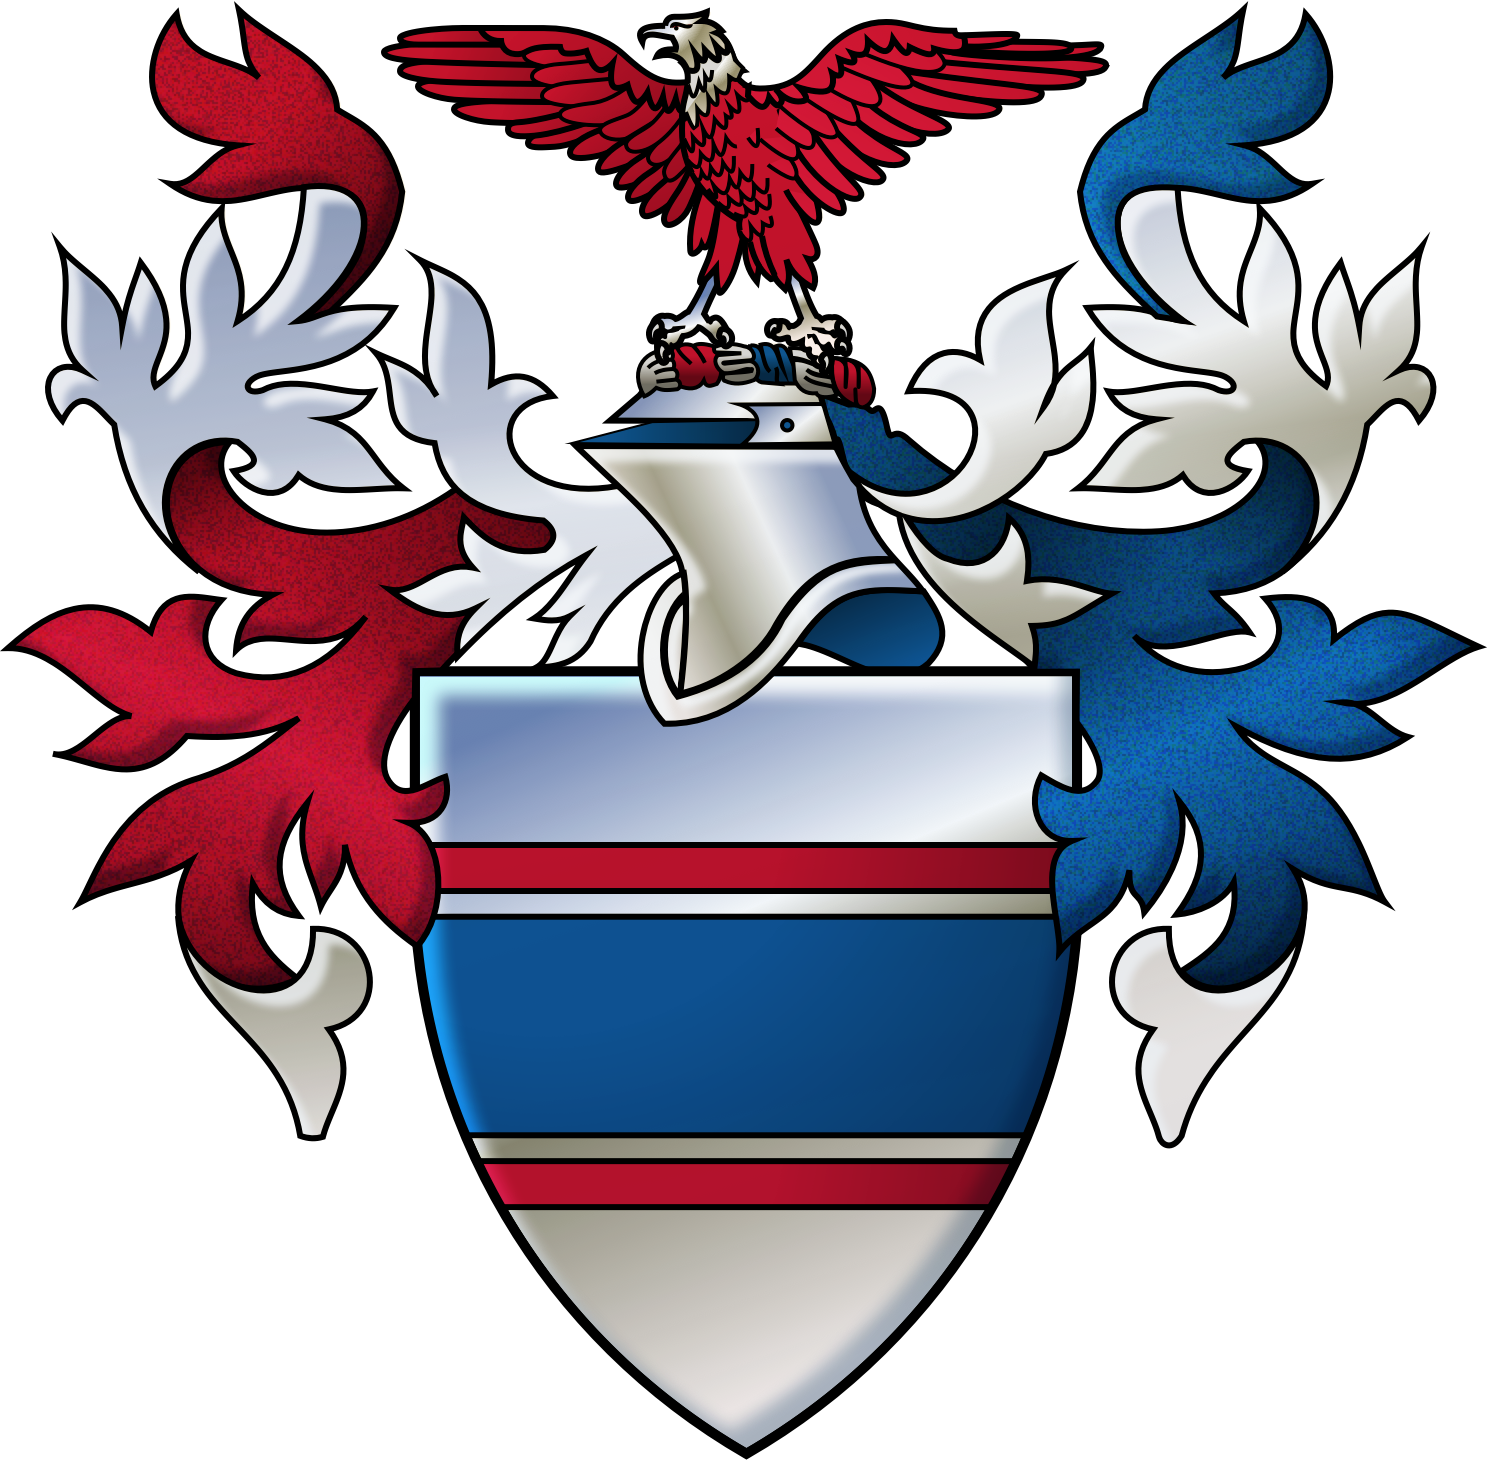 Occorporate Heraldry The Arms Of The Eagle Transport - Coat Of Arms (1488x1460)